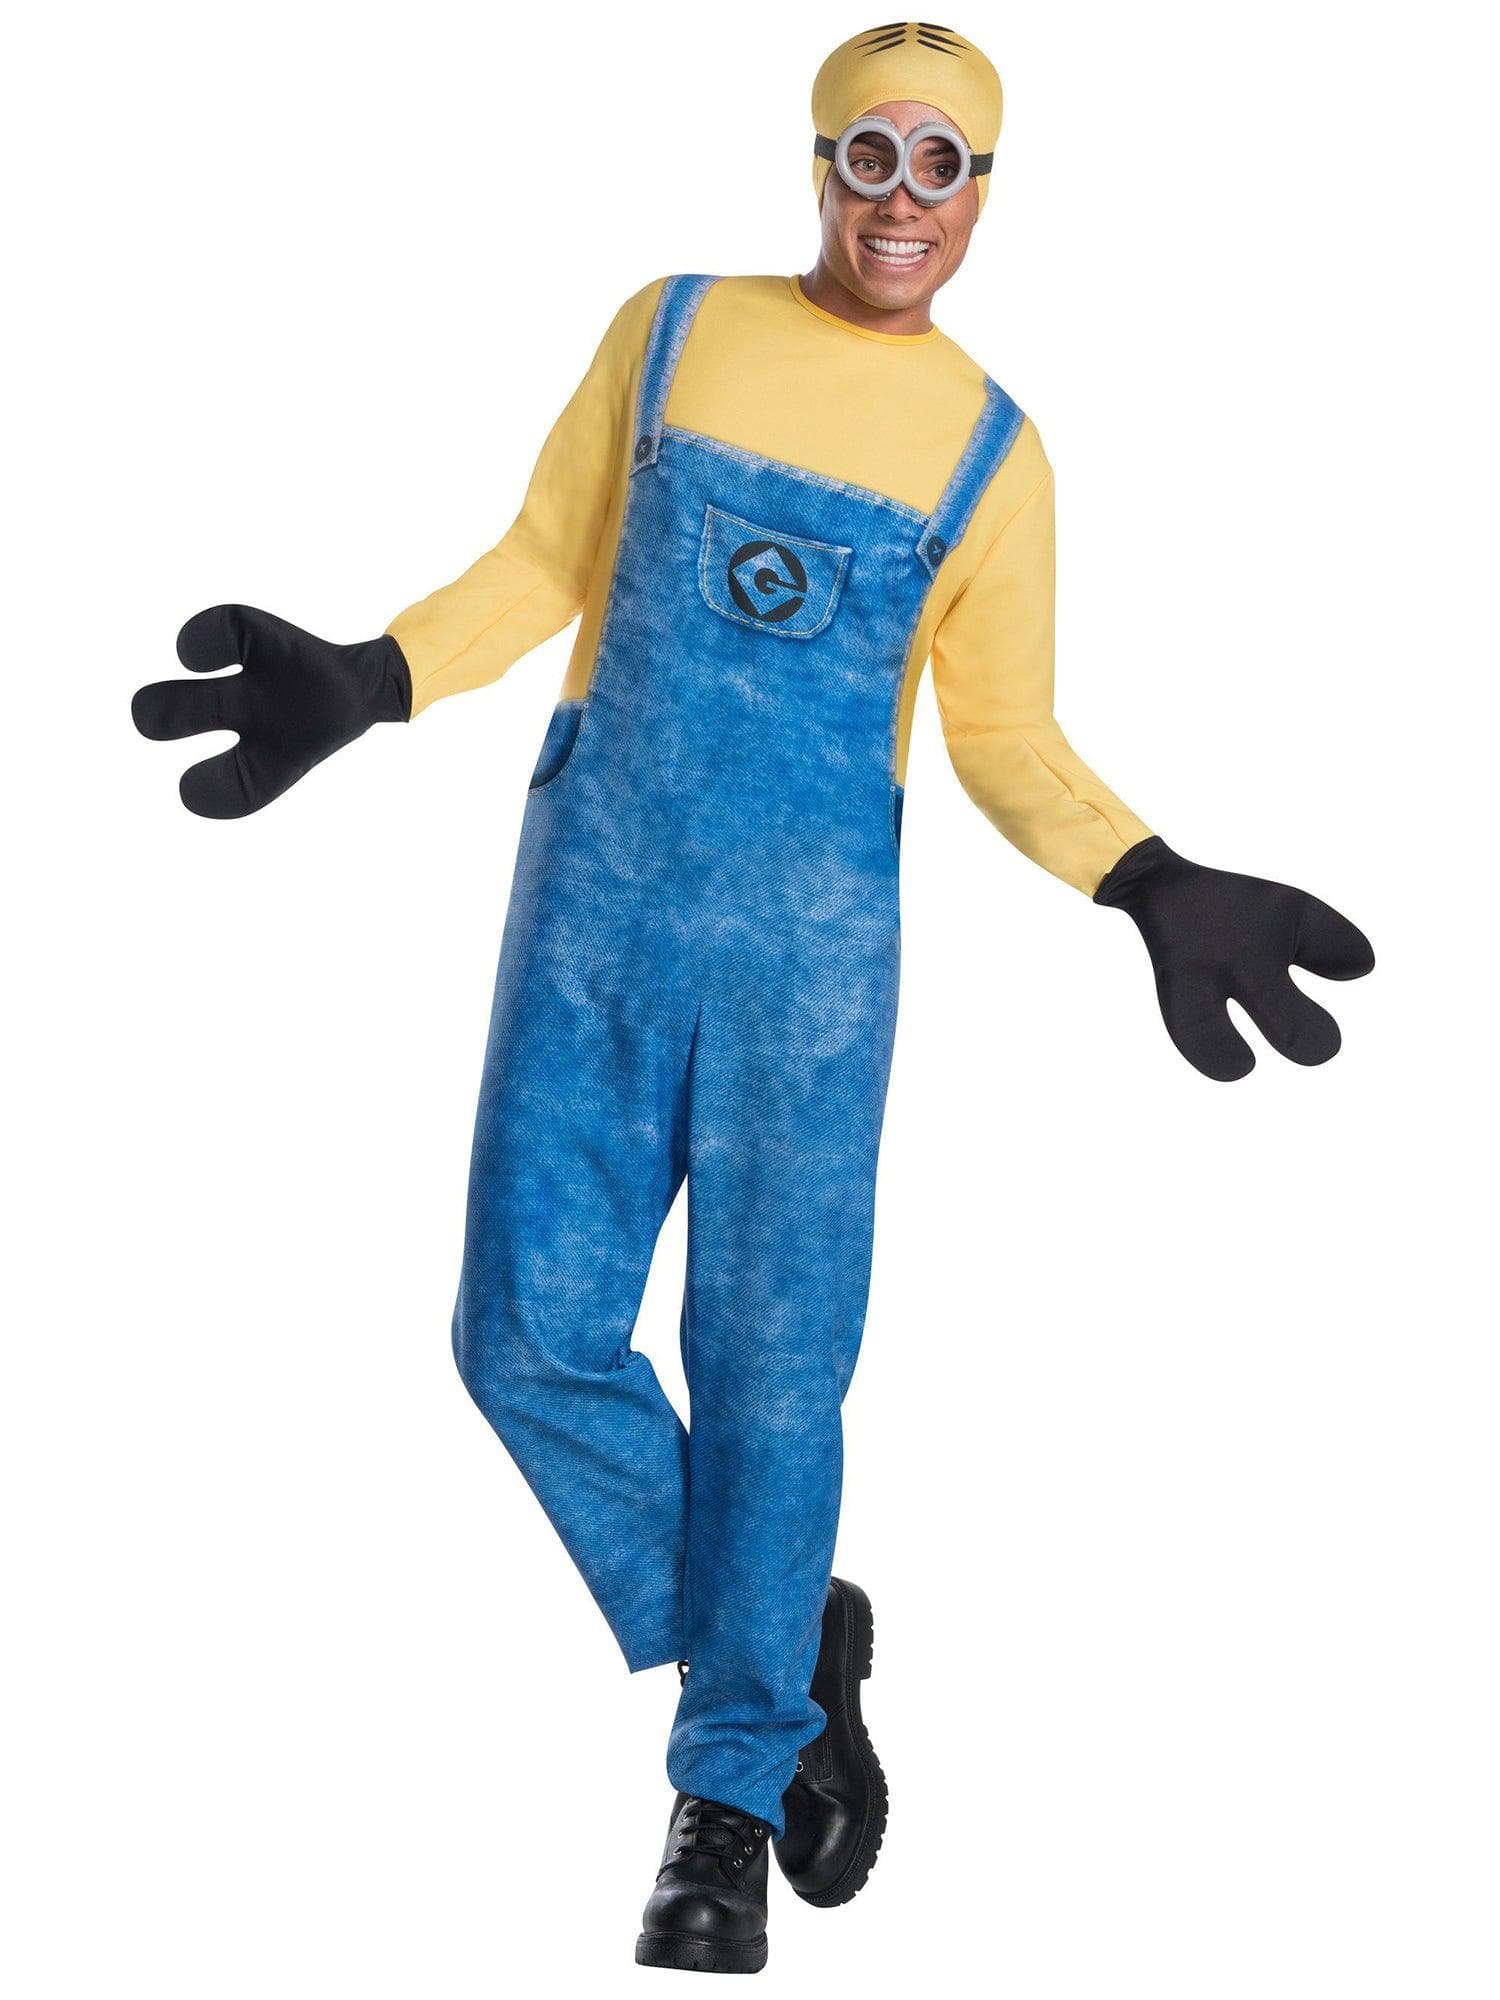 Adult Despicable Me Minions Costume - costumes.com